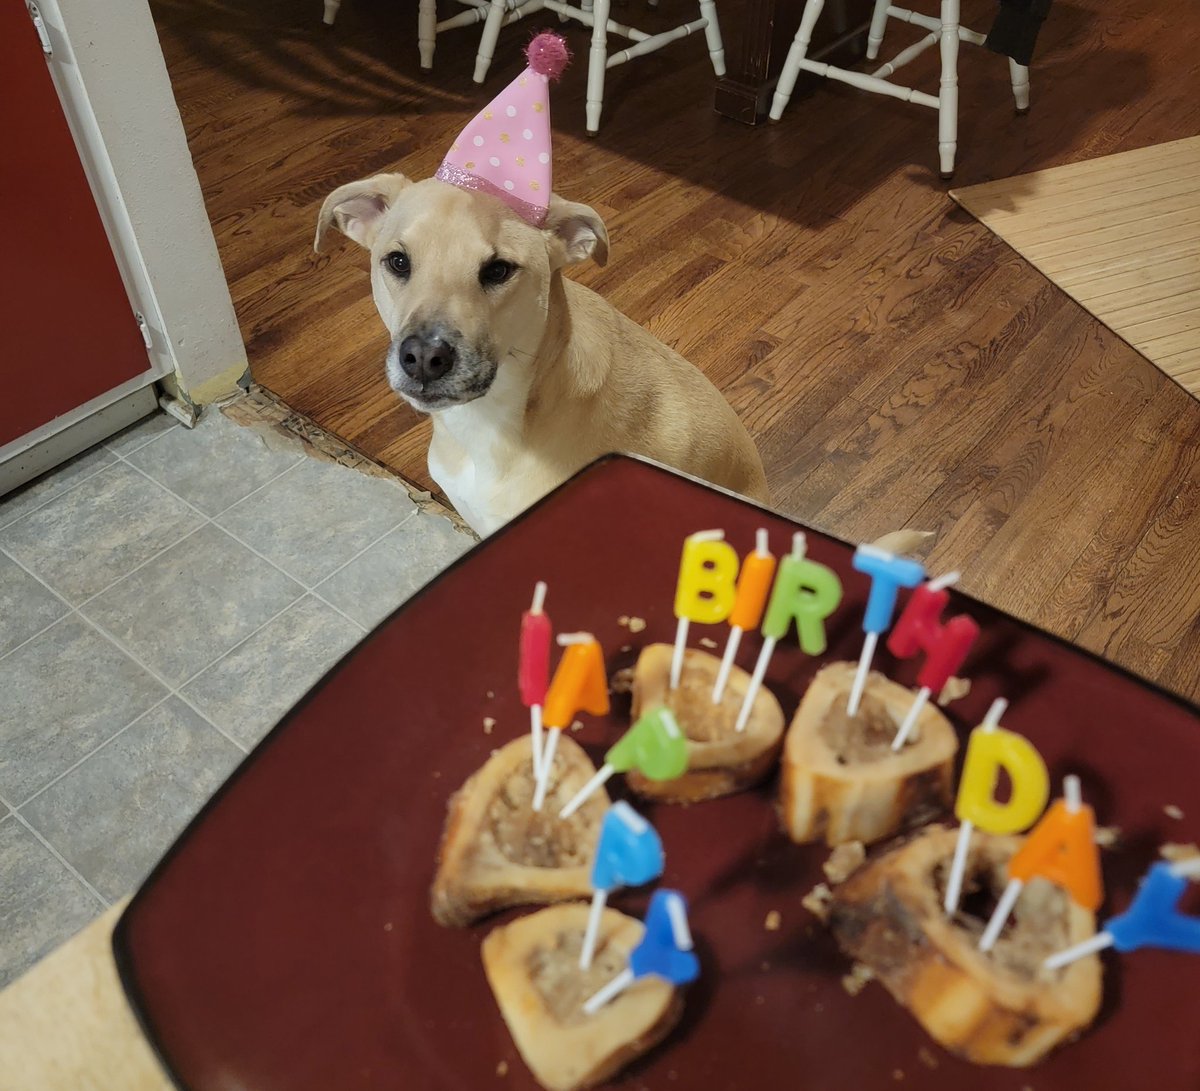 Happy 5th Birthday Arya! You are such a cutie. Thank you for posing in your hat! Does anyone else celebrate pet birthdays like this? Share your photos!